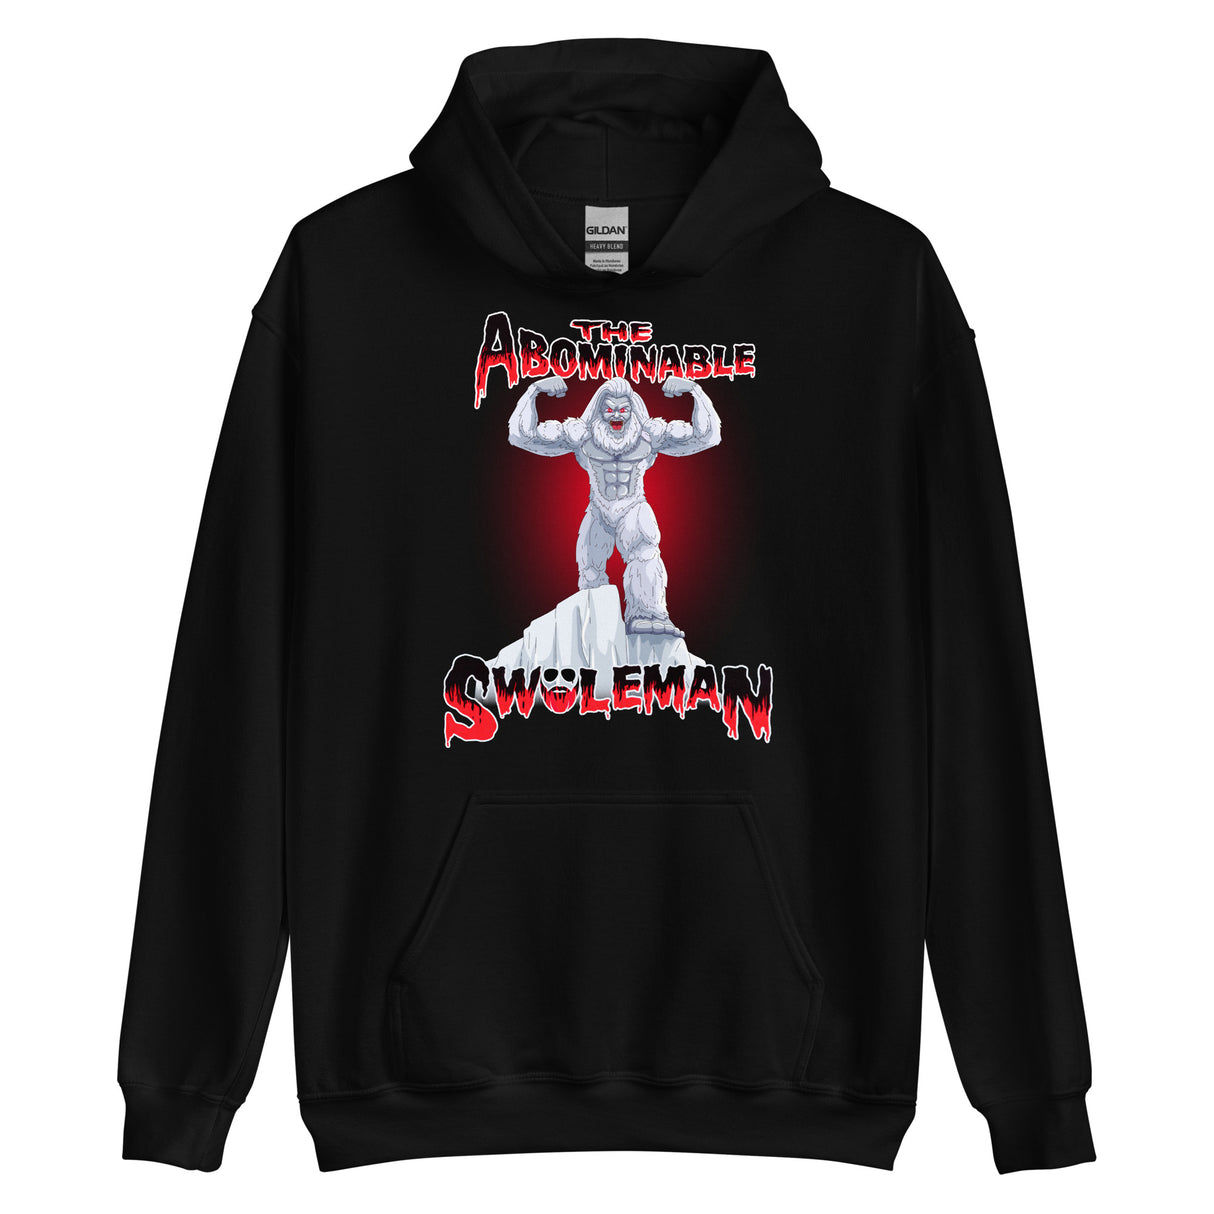 The Abominable Swoleman Hoodie